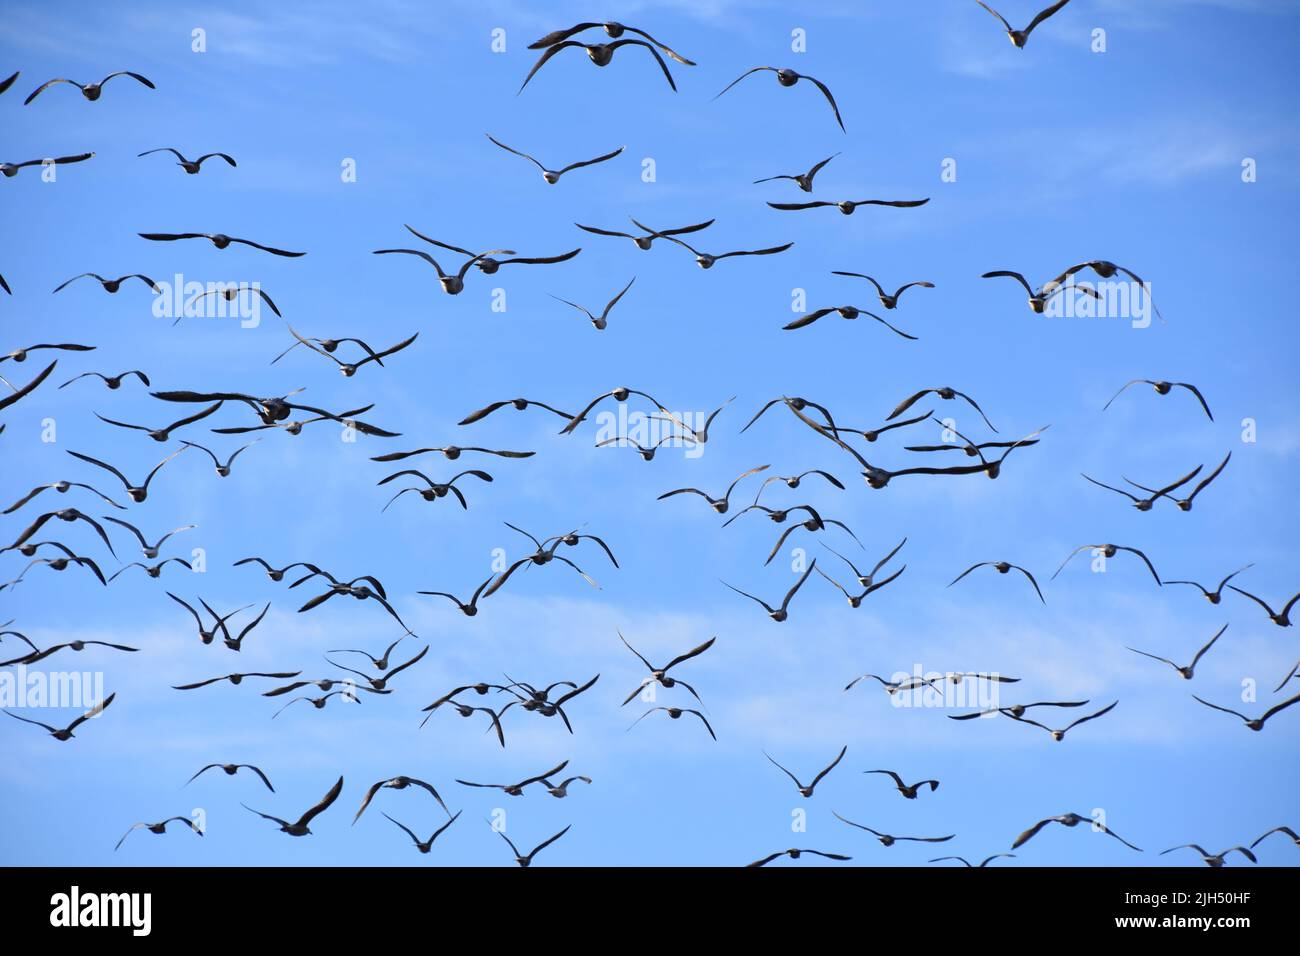 Big group of seagull birds flying against blue sky Stock Photo